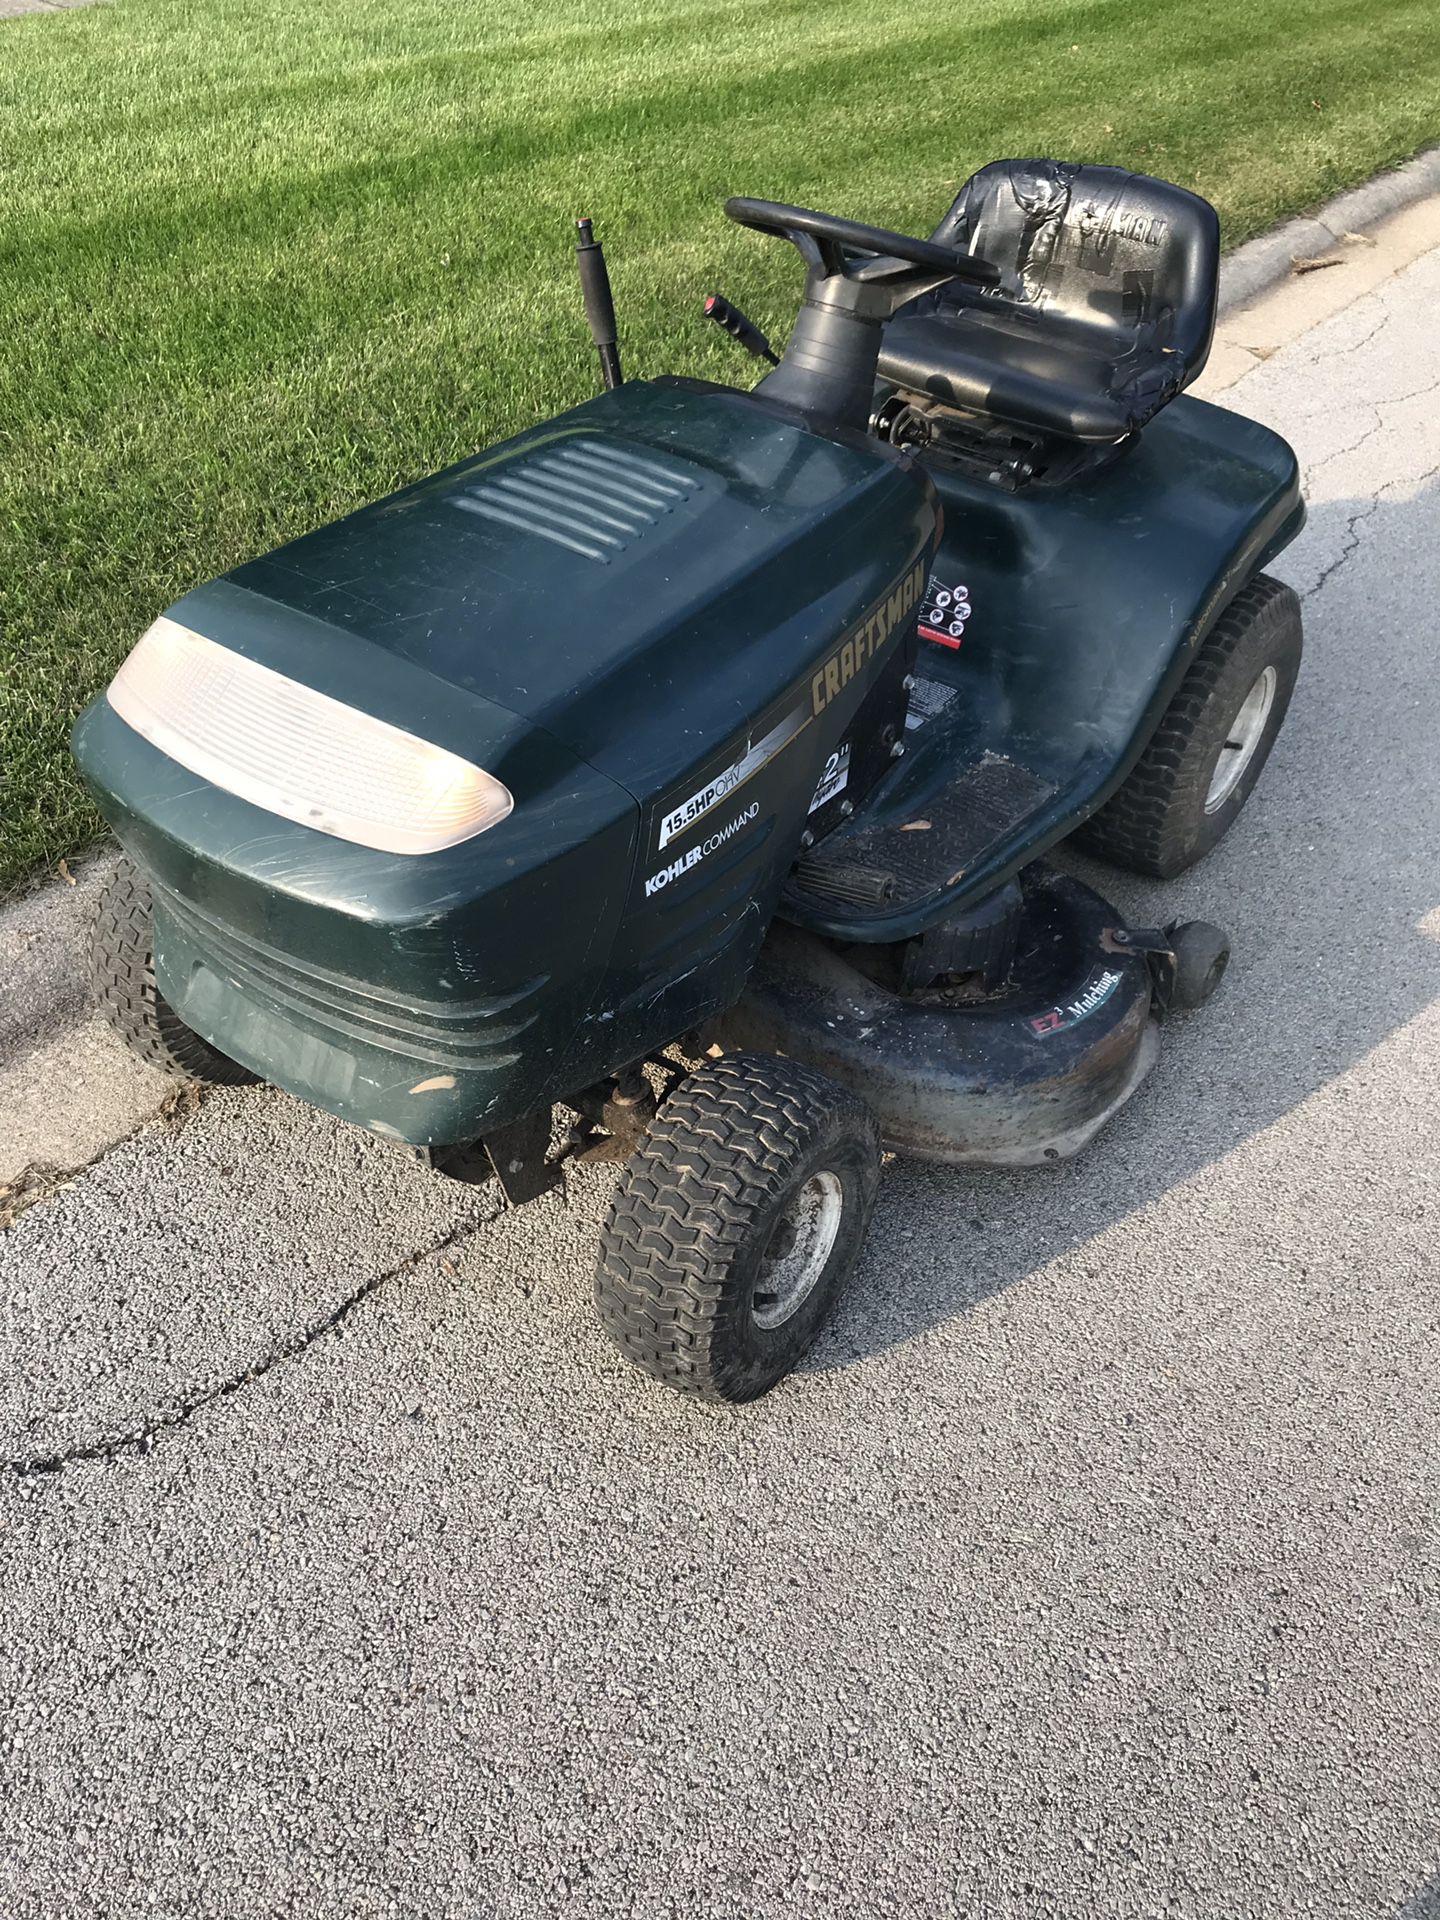 Craftsman hydrostatic lawn riding mower with a 15.5 HP Kohler Command Engine. Move the lever on the right to go forward and back, the more you move i